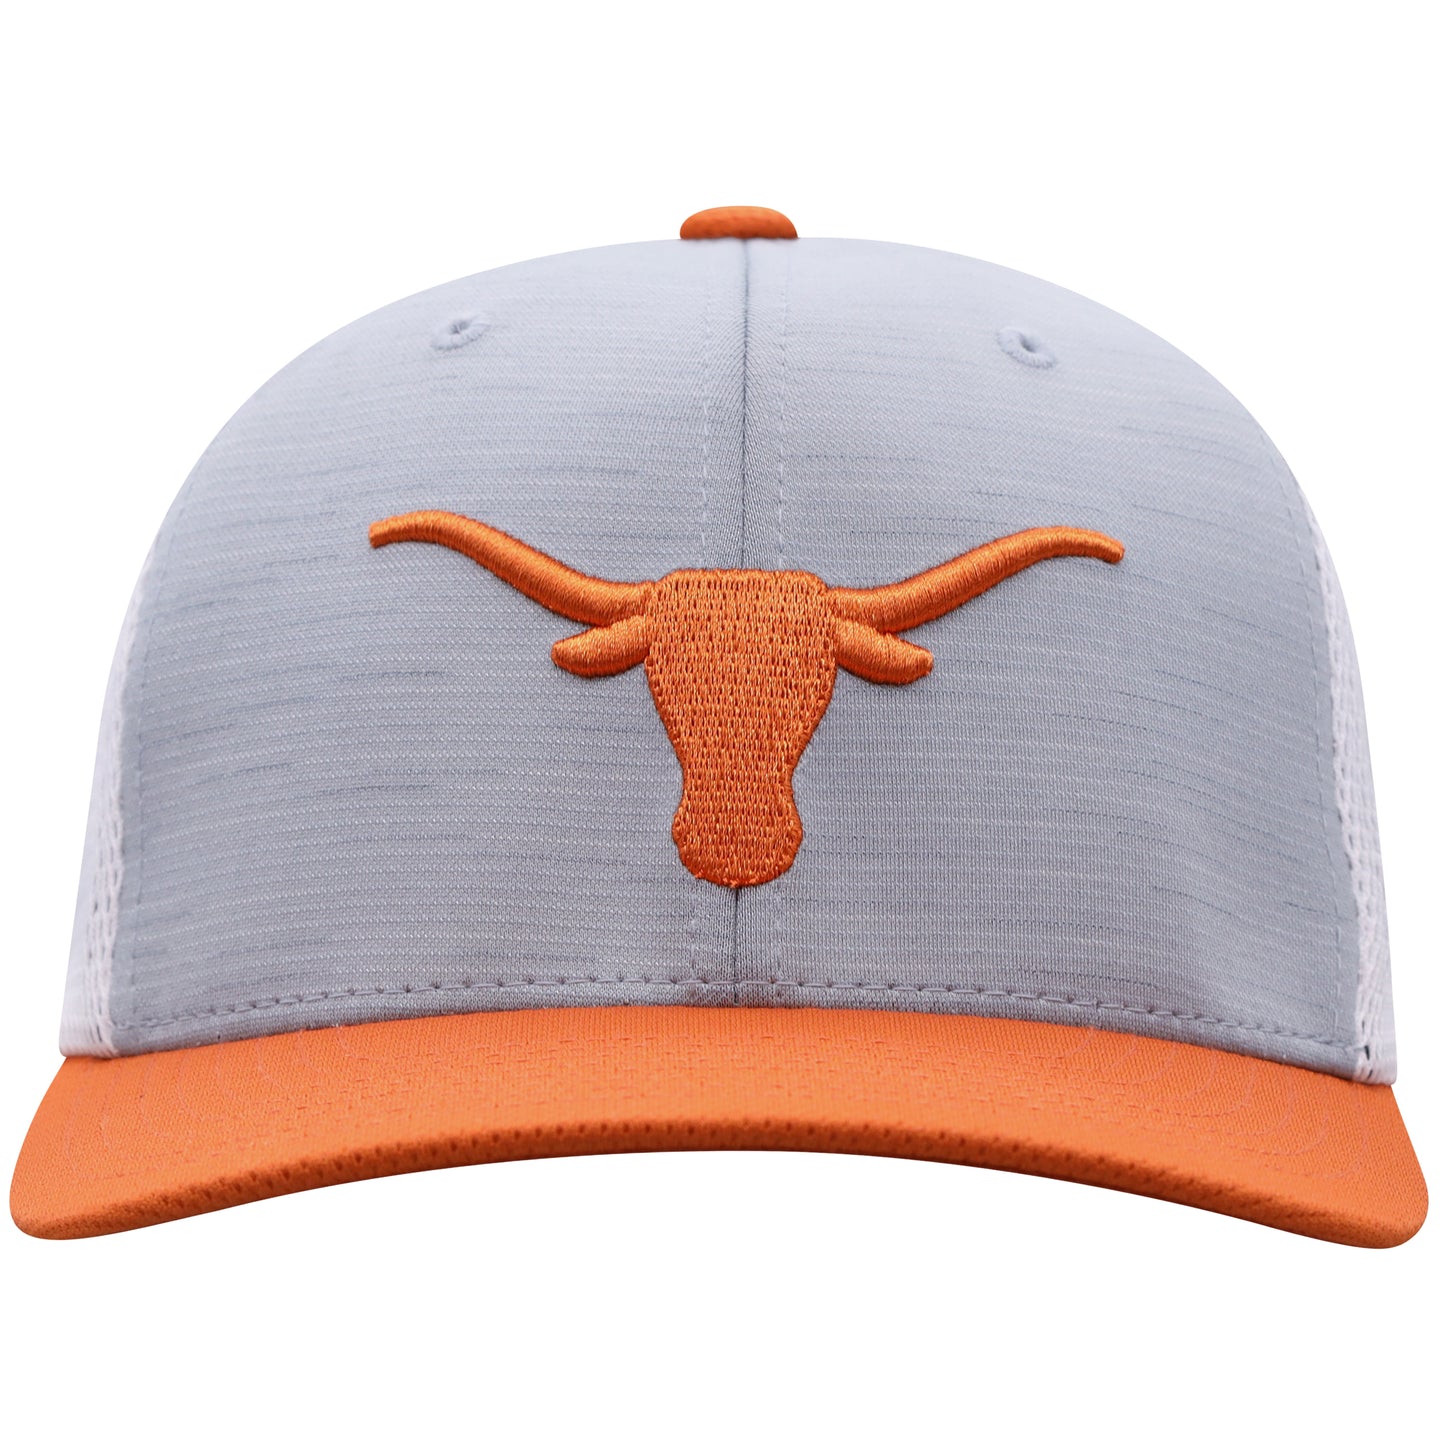 Men's Texas Longhorns Stamp 3-Tone Flex Fit Hat By Top Of the World